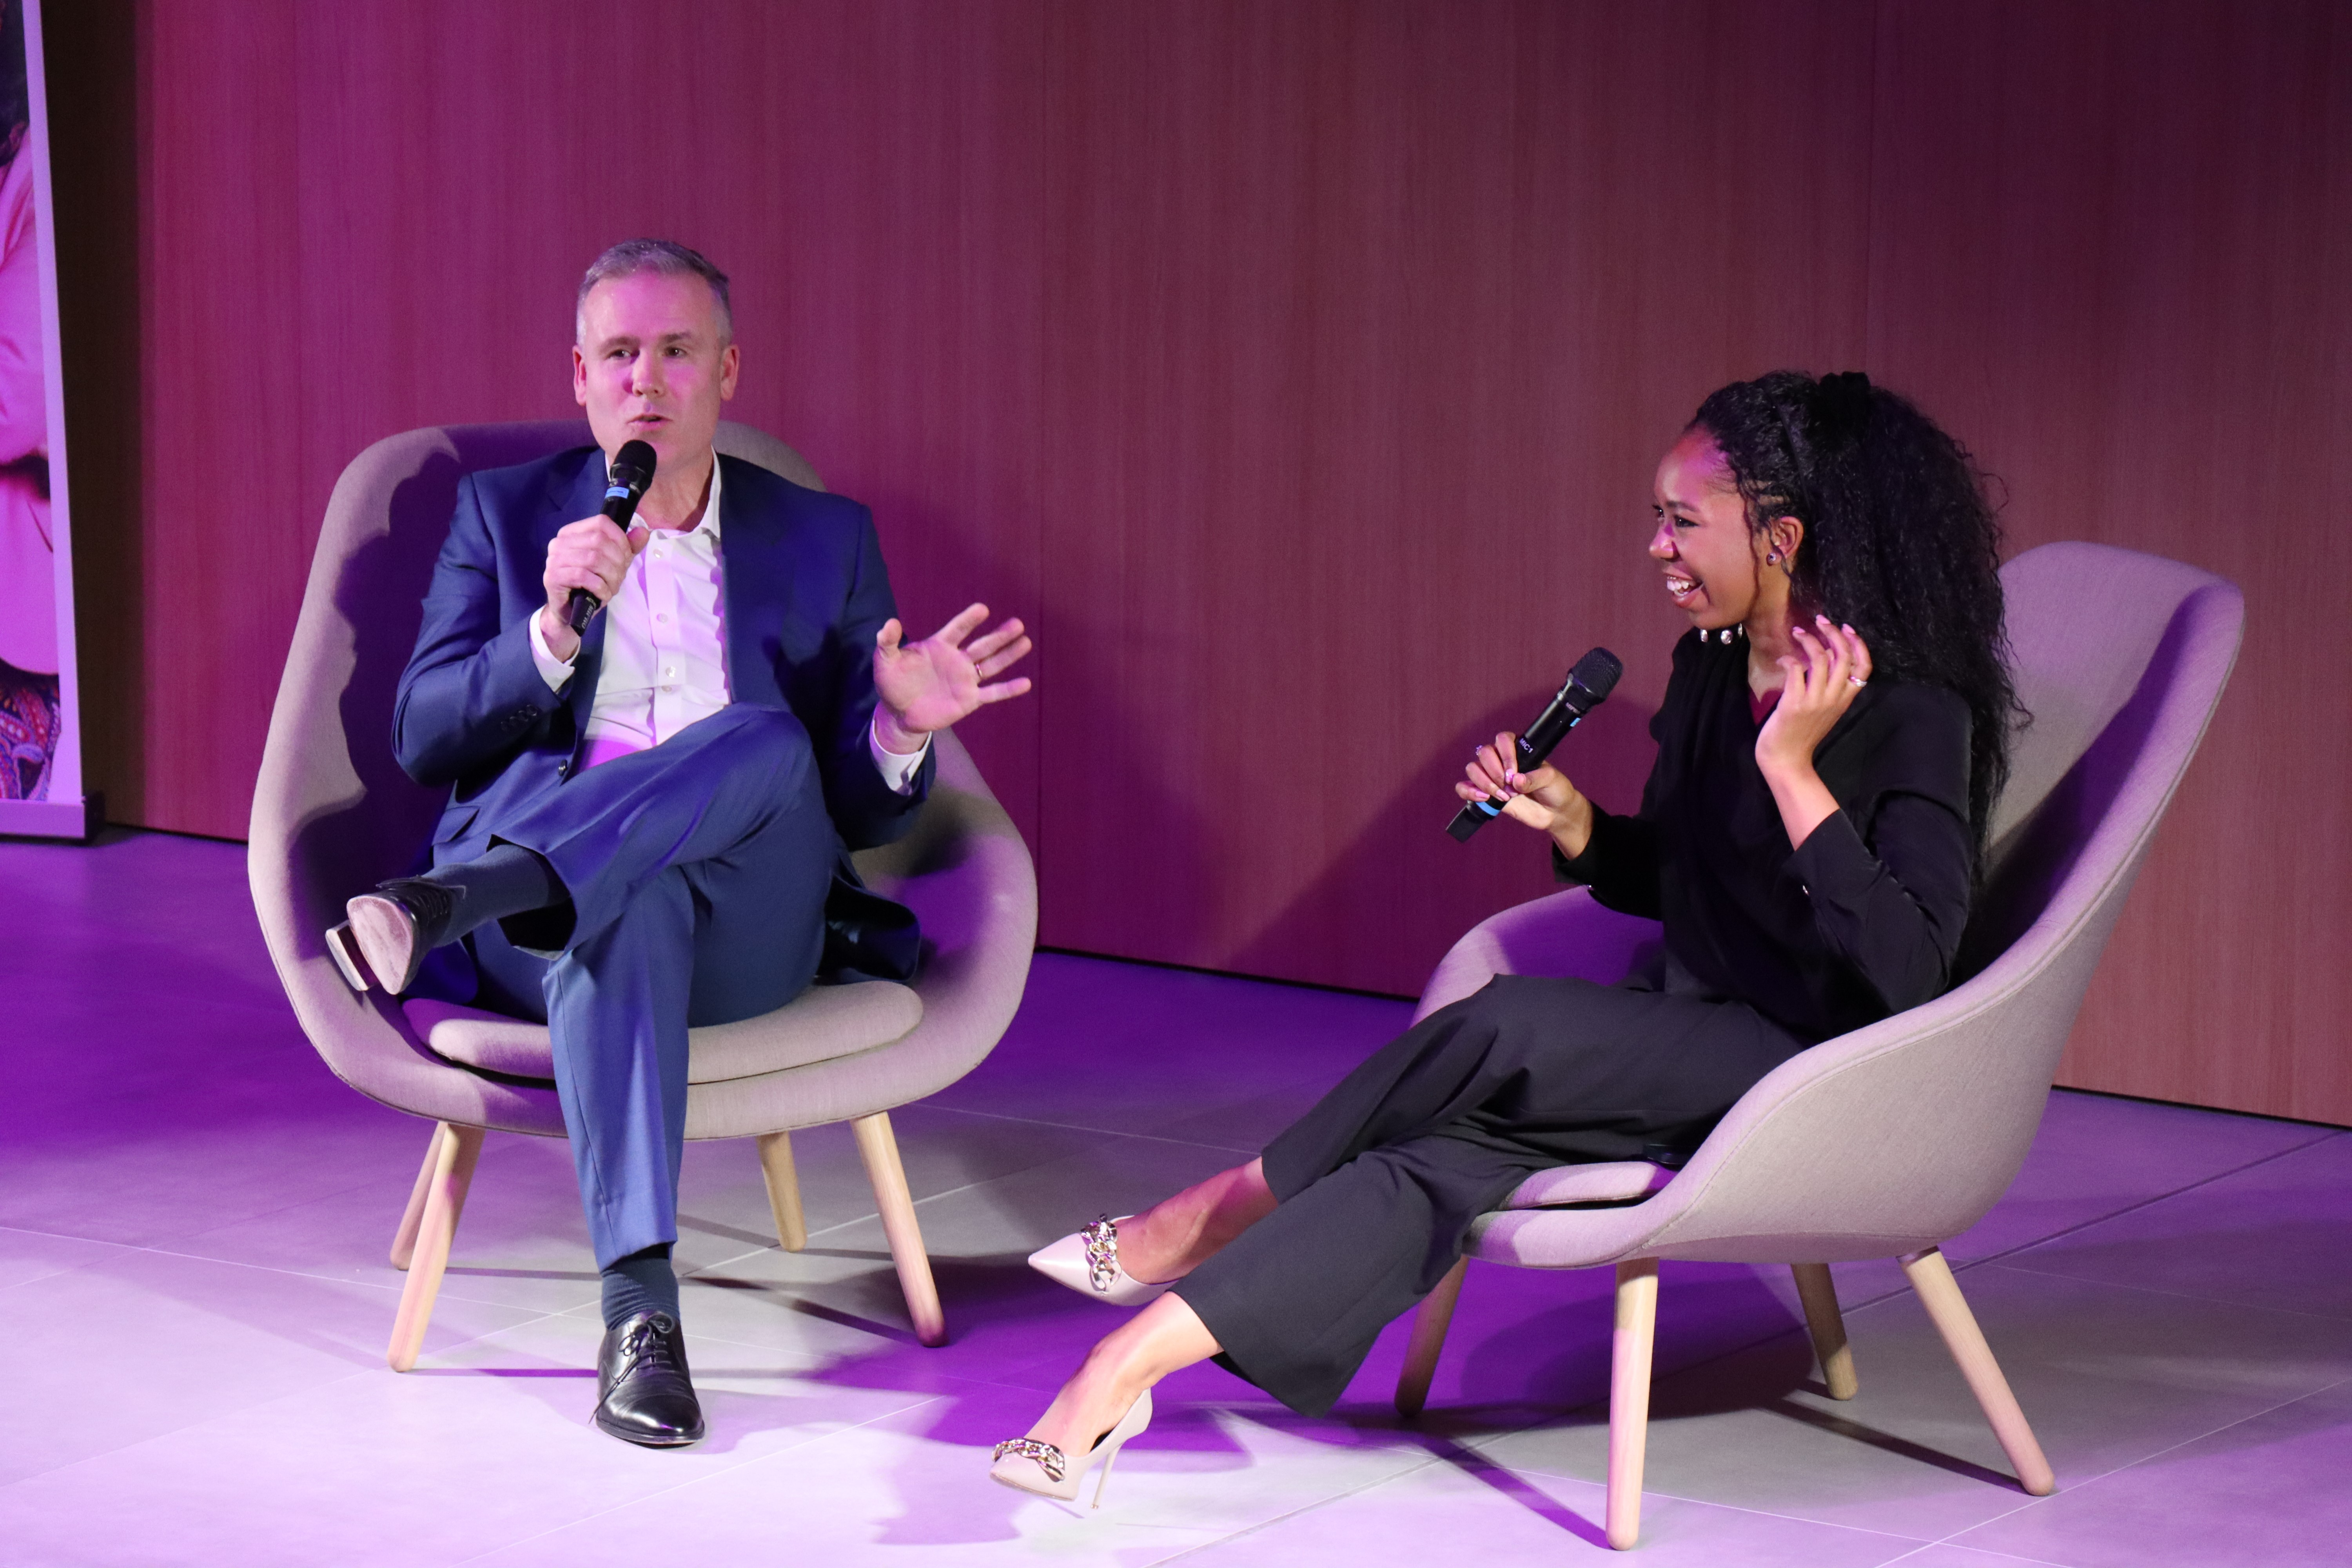 Image shows George Williamson, CEO of HMGCC and Lakechia Jeanne, Girls in Science founder, seated and in conversation